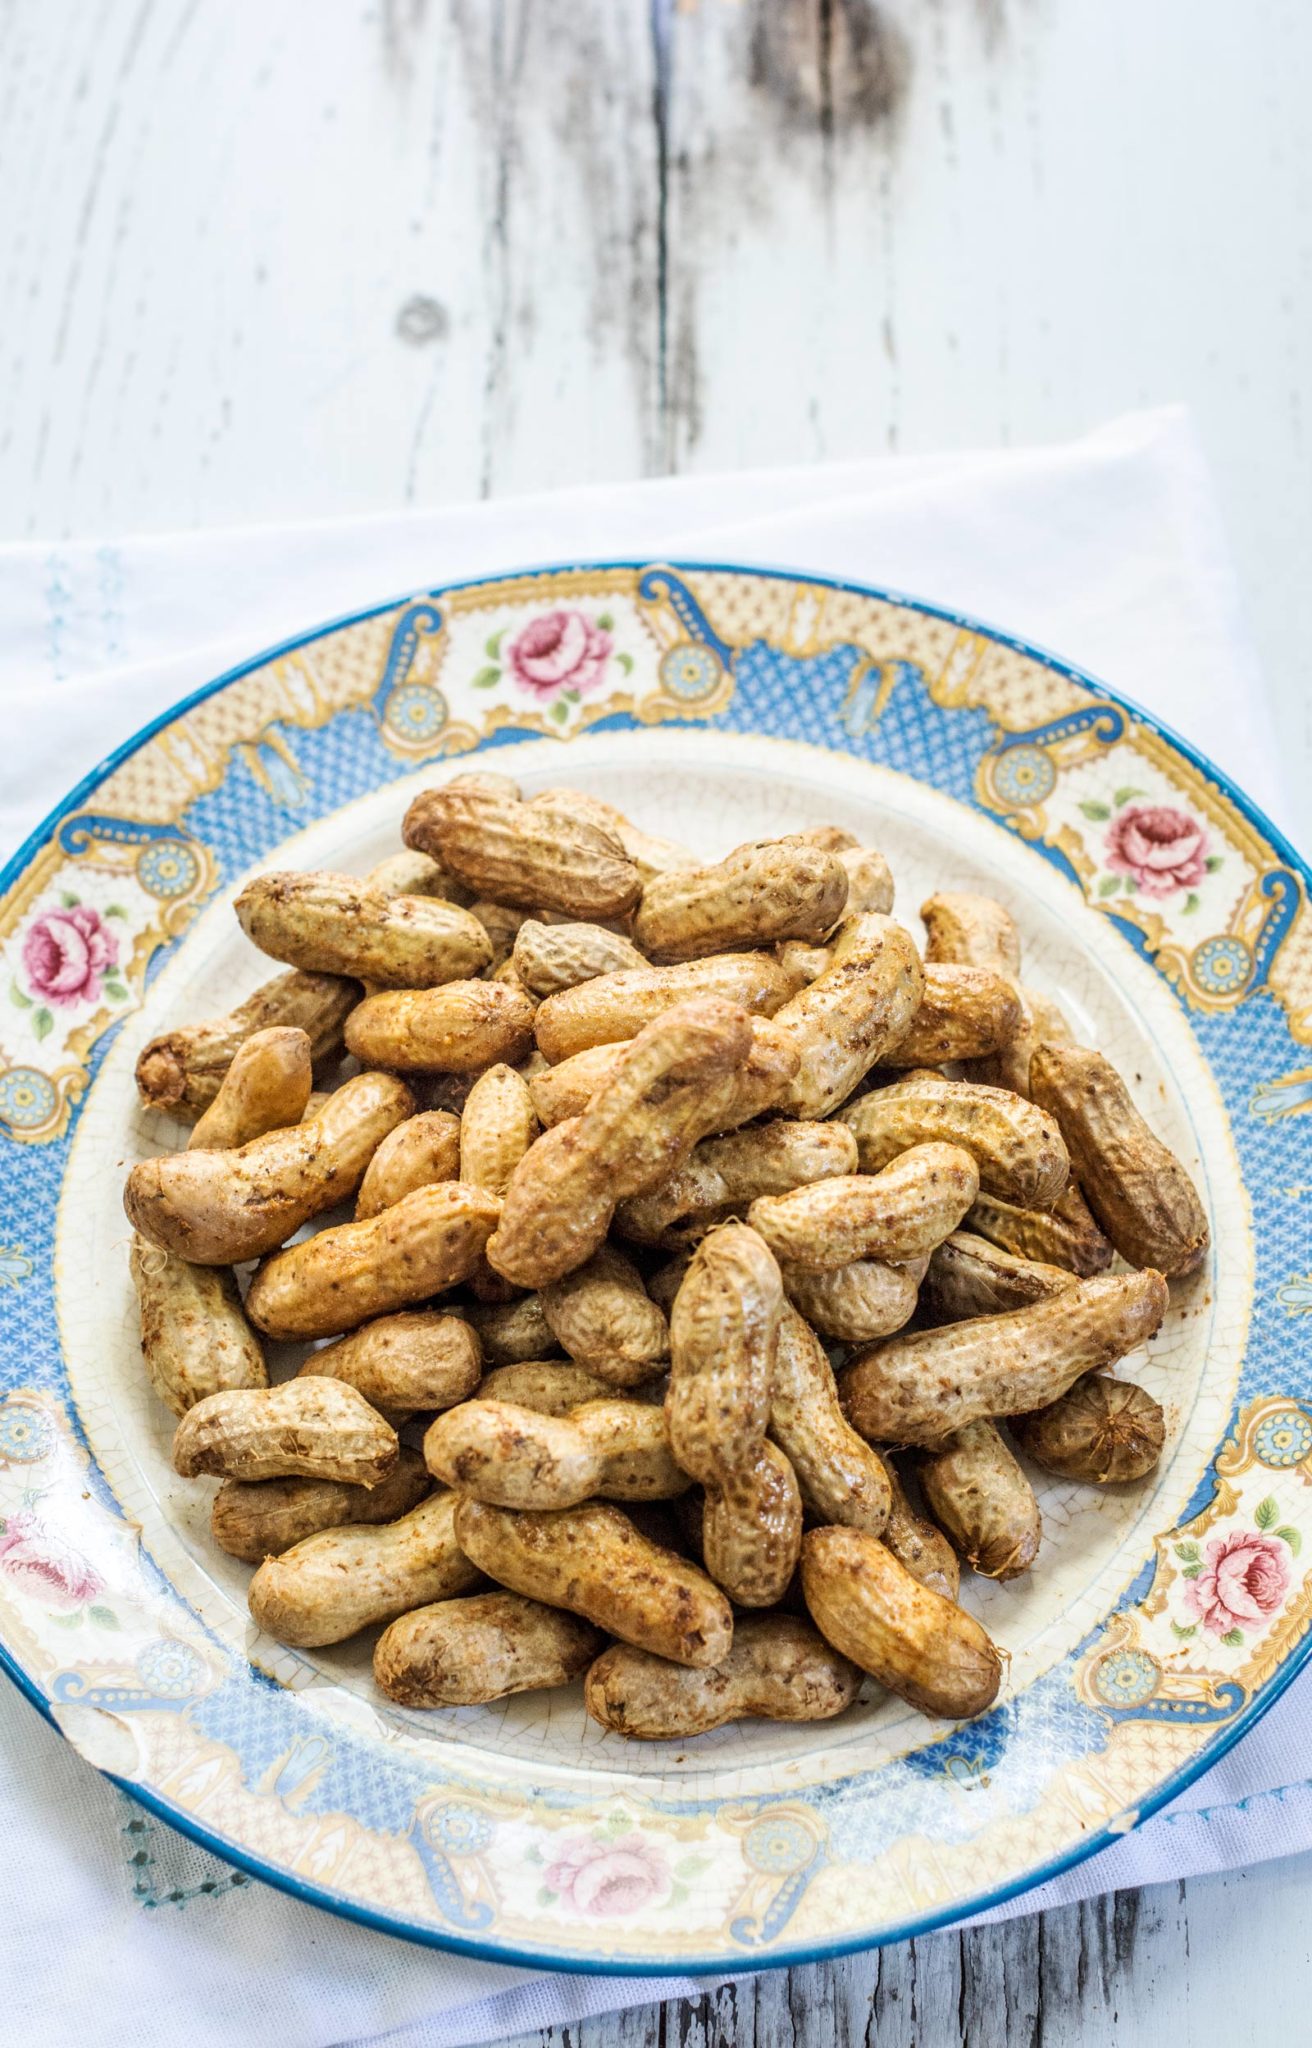 Try this southern favorite, Hot and Tabasco Spiked Spicy Boiled Peanuts recipe! Find out how to make them at Little Figgy Food.